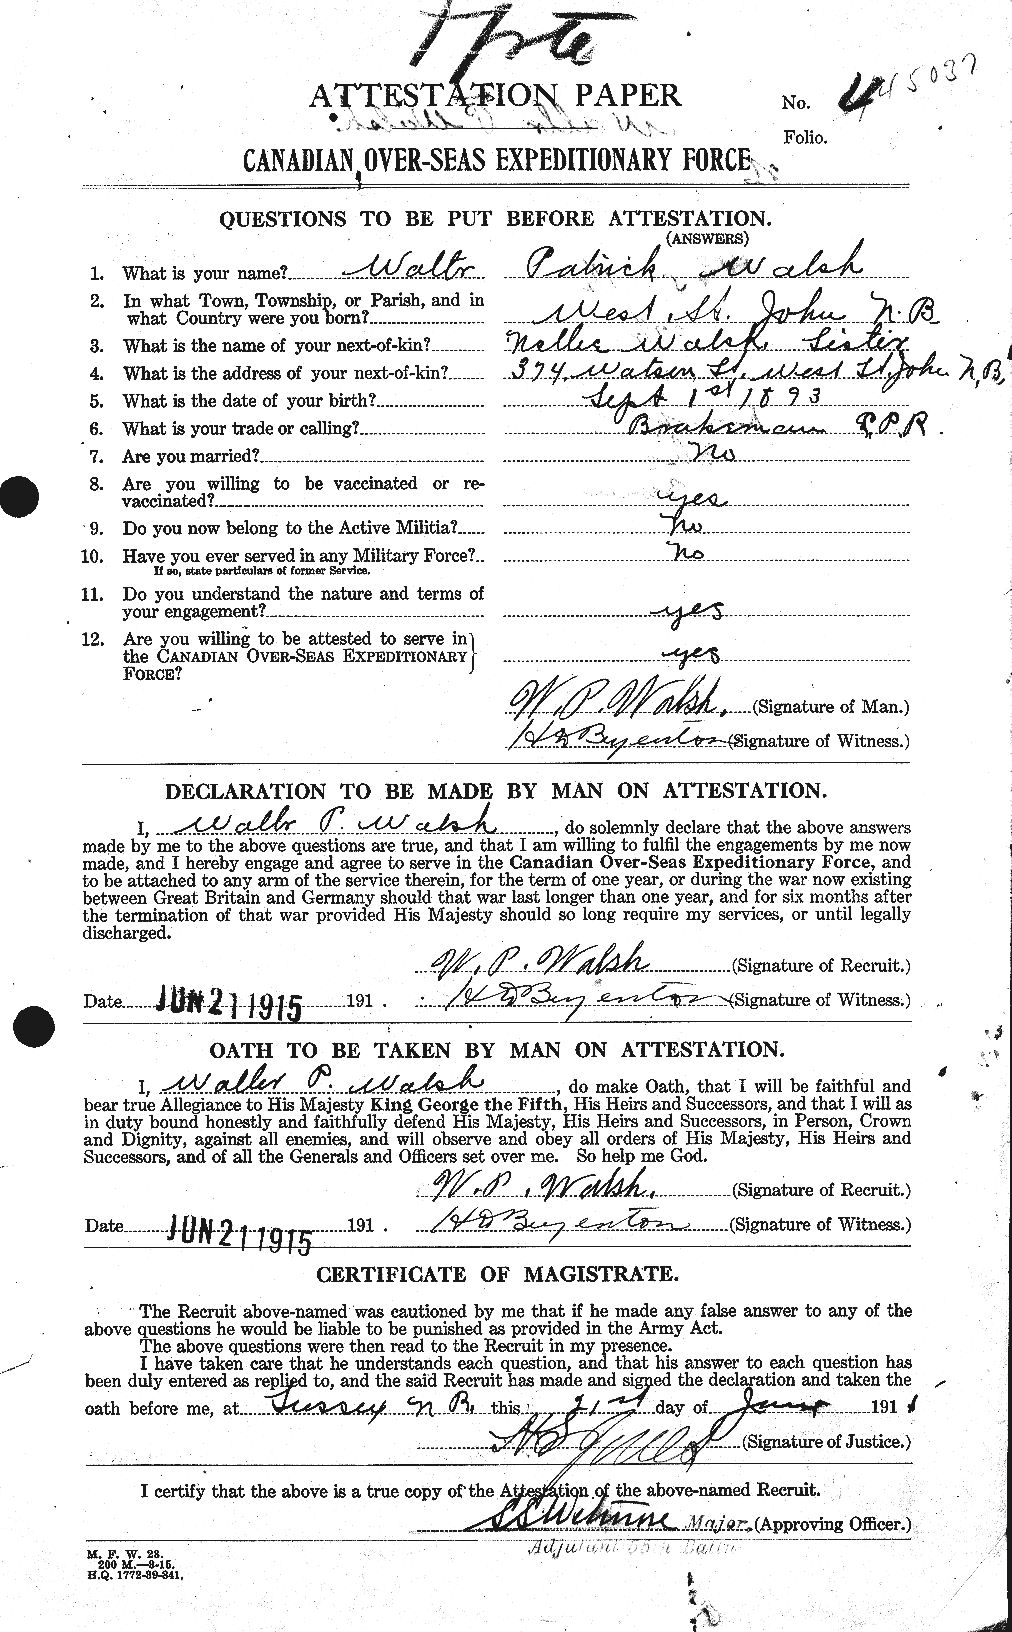 Personnel Records of the First World War - CEF 653564a